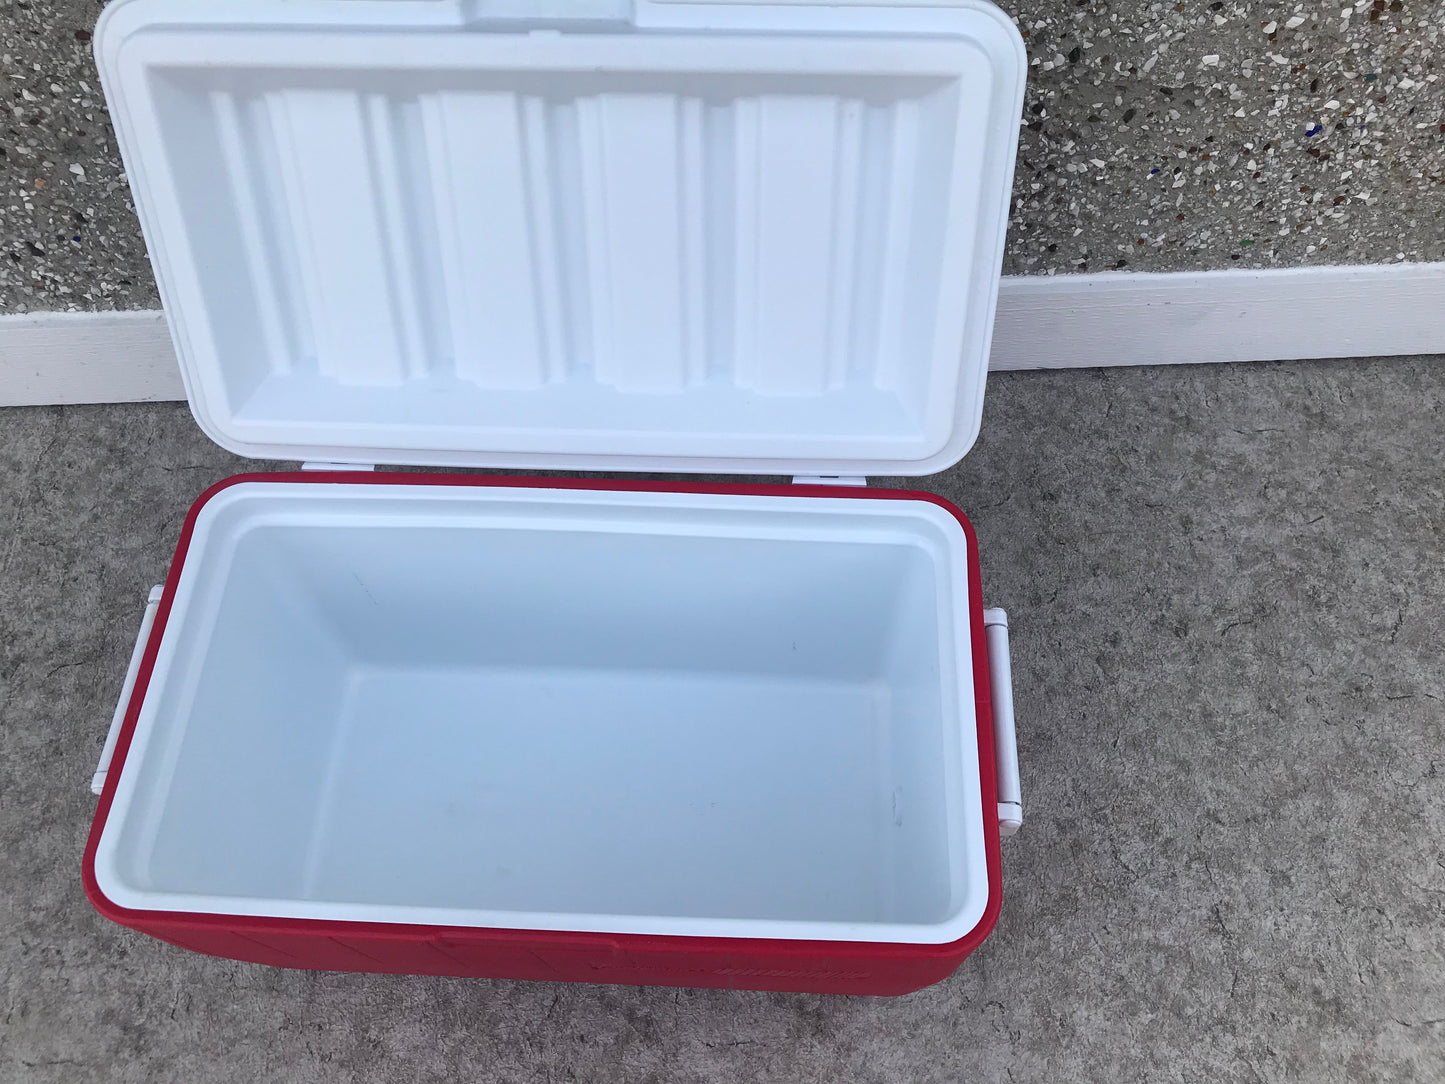 Camping Adventures Cooler Coleman Chest 48 Qt Drain Plug Keeps Ice 3 Days Excellent Red White